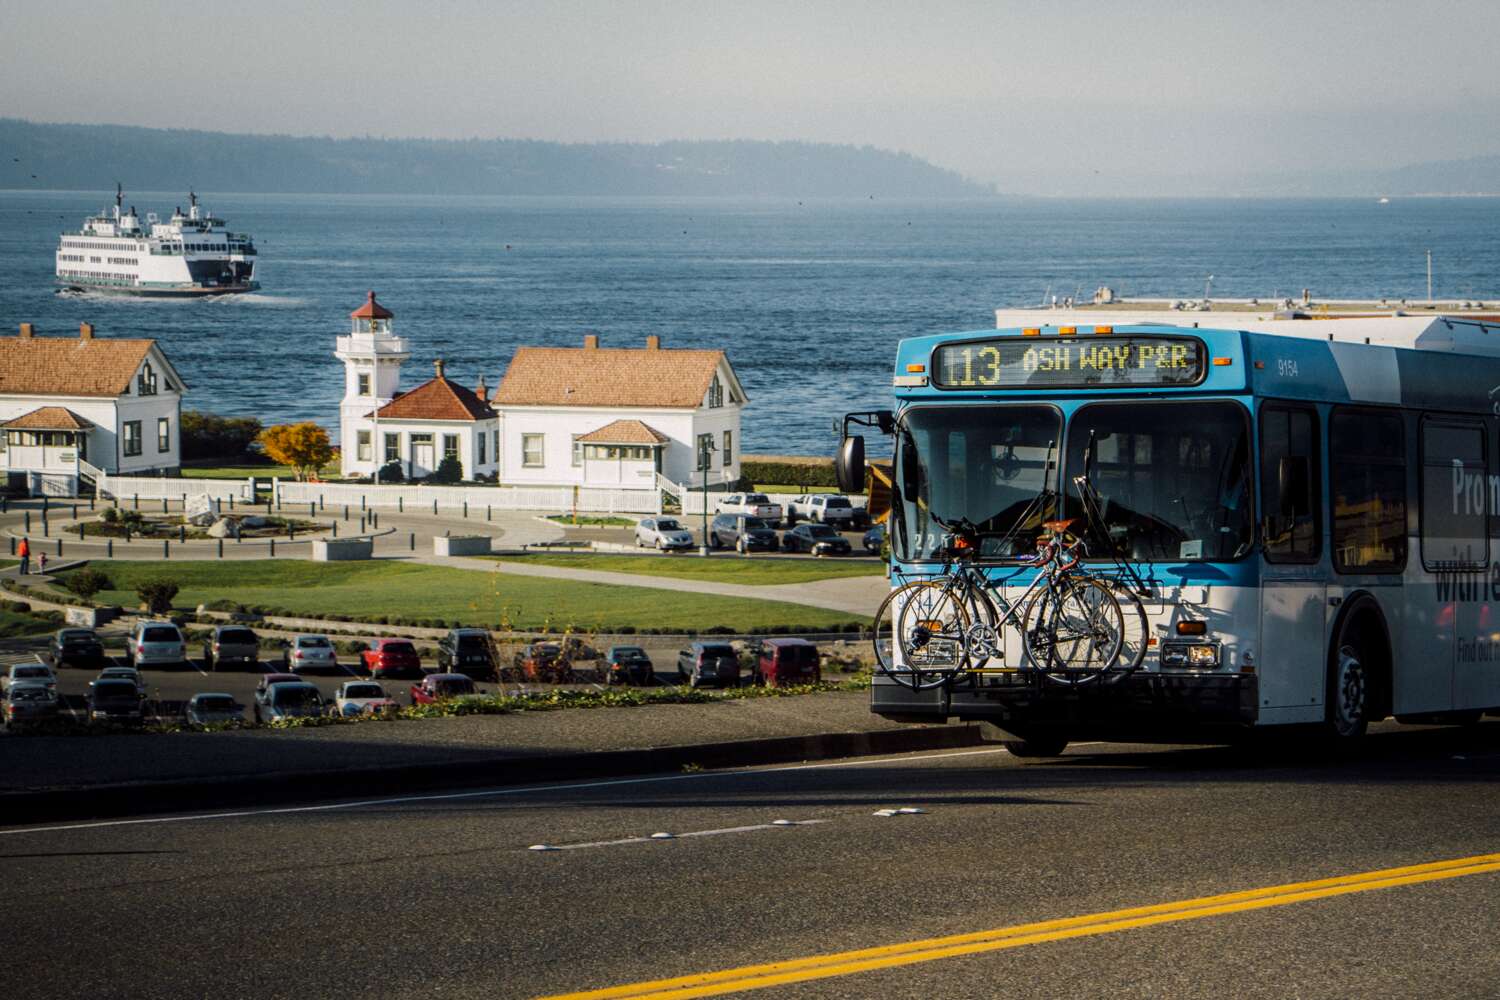 Bus driving in the city of Mukilteo with the lighthouse and a ferry in the background.